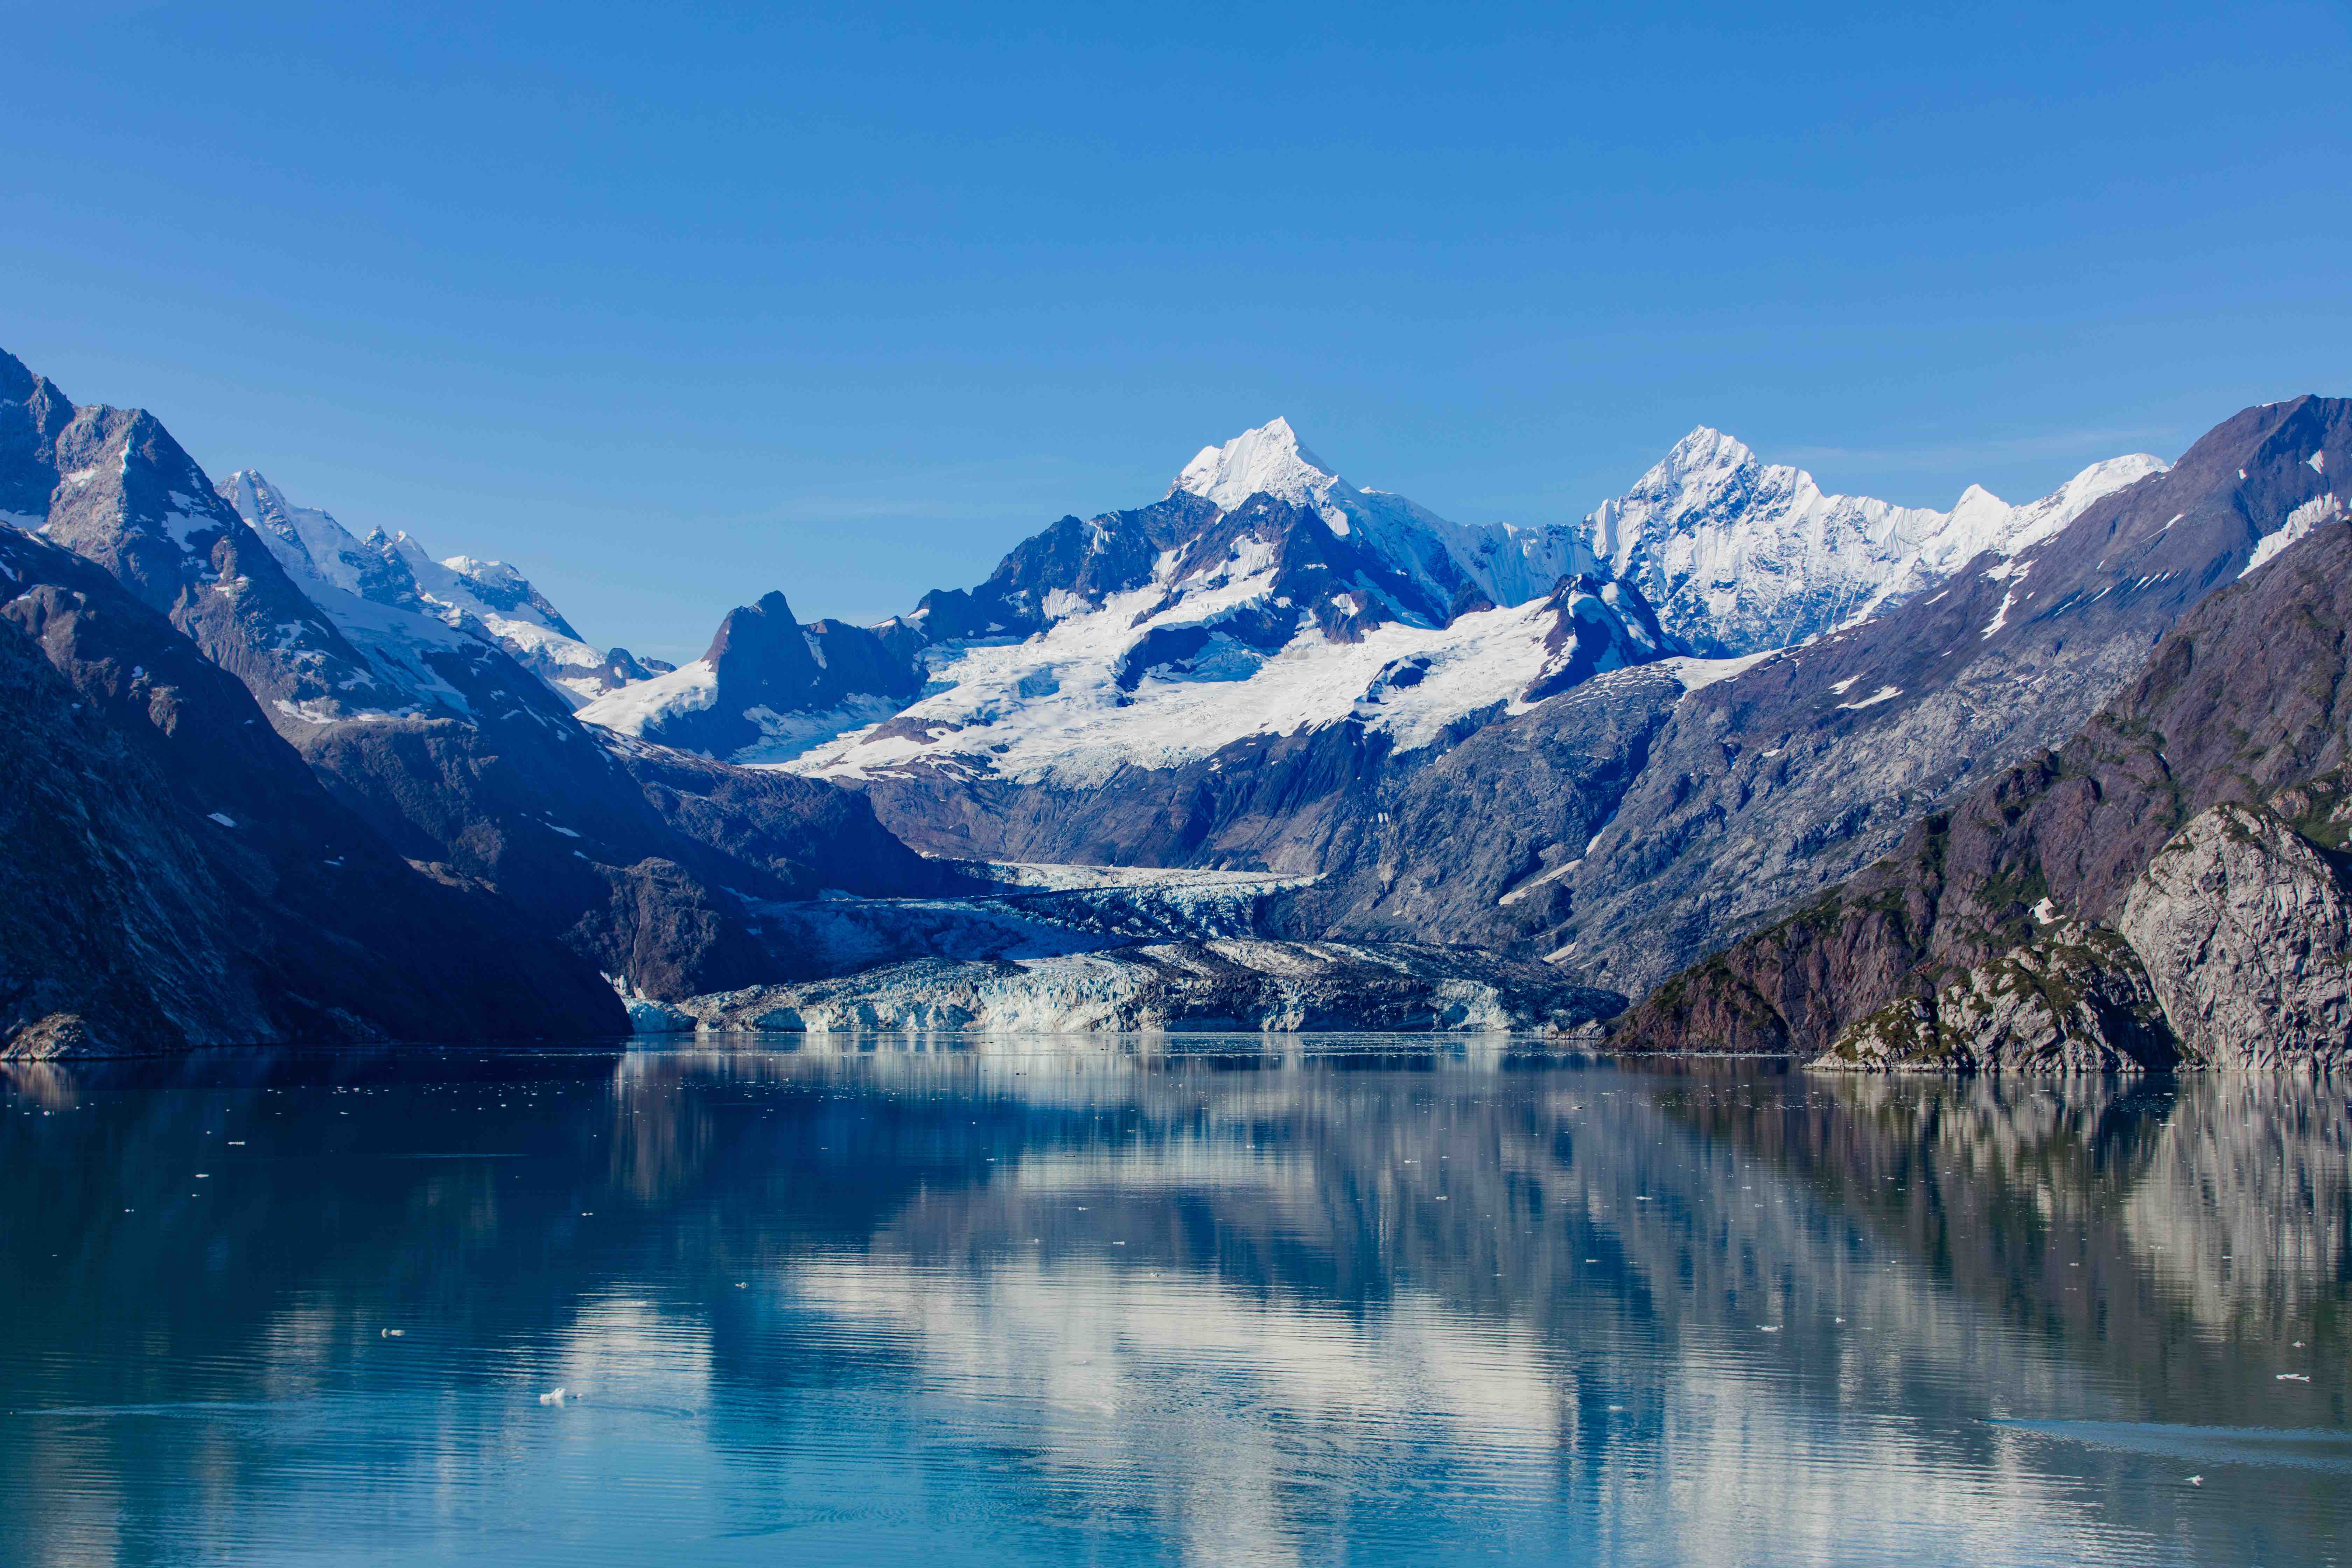 Snow-covered Sawyer Glacier towering above the water